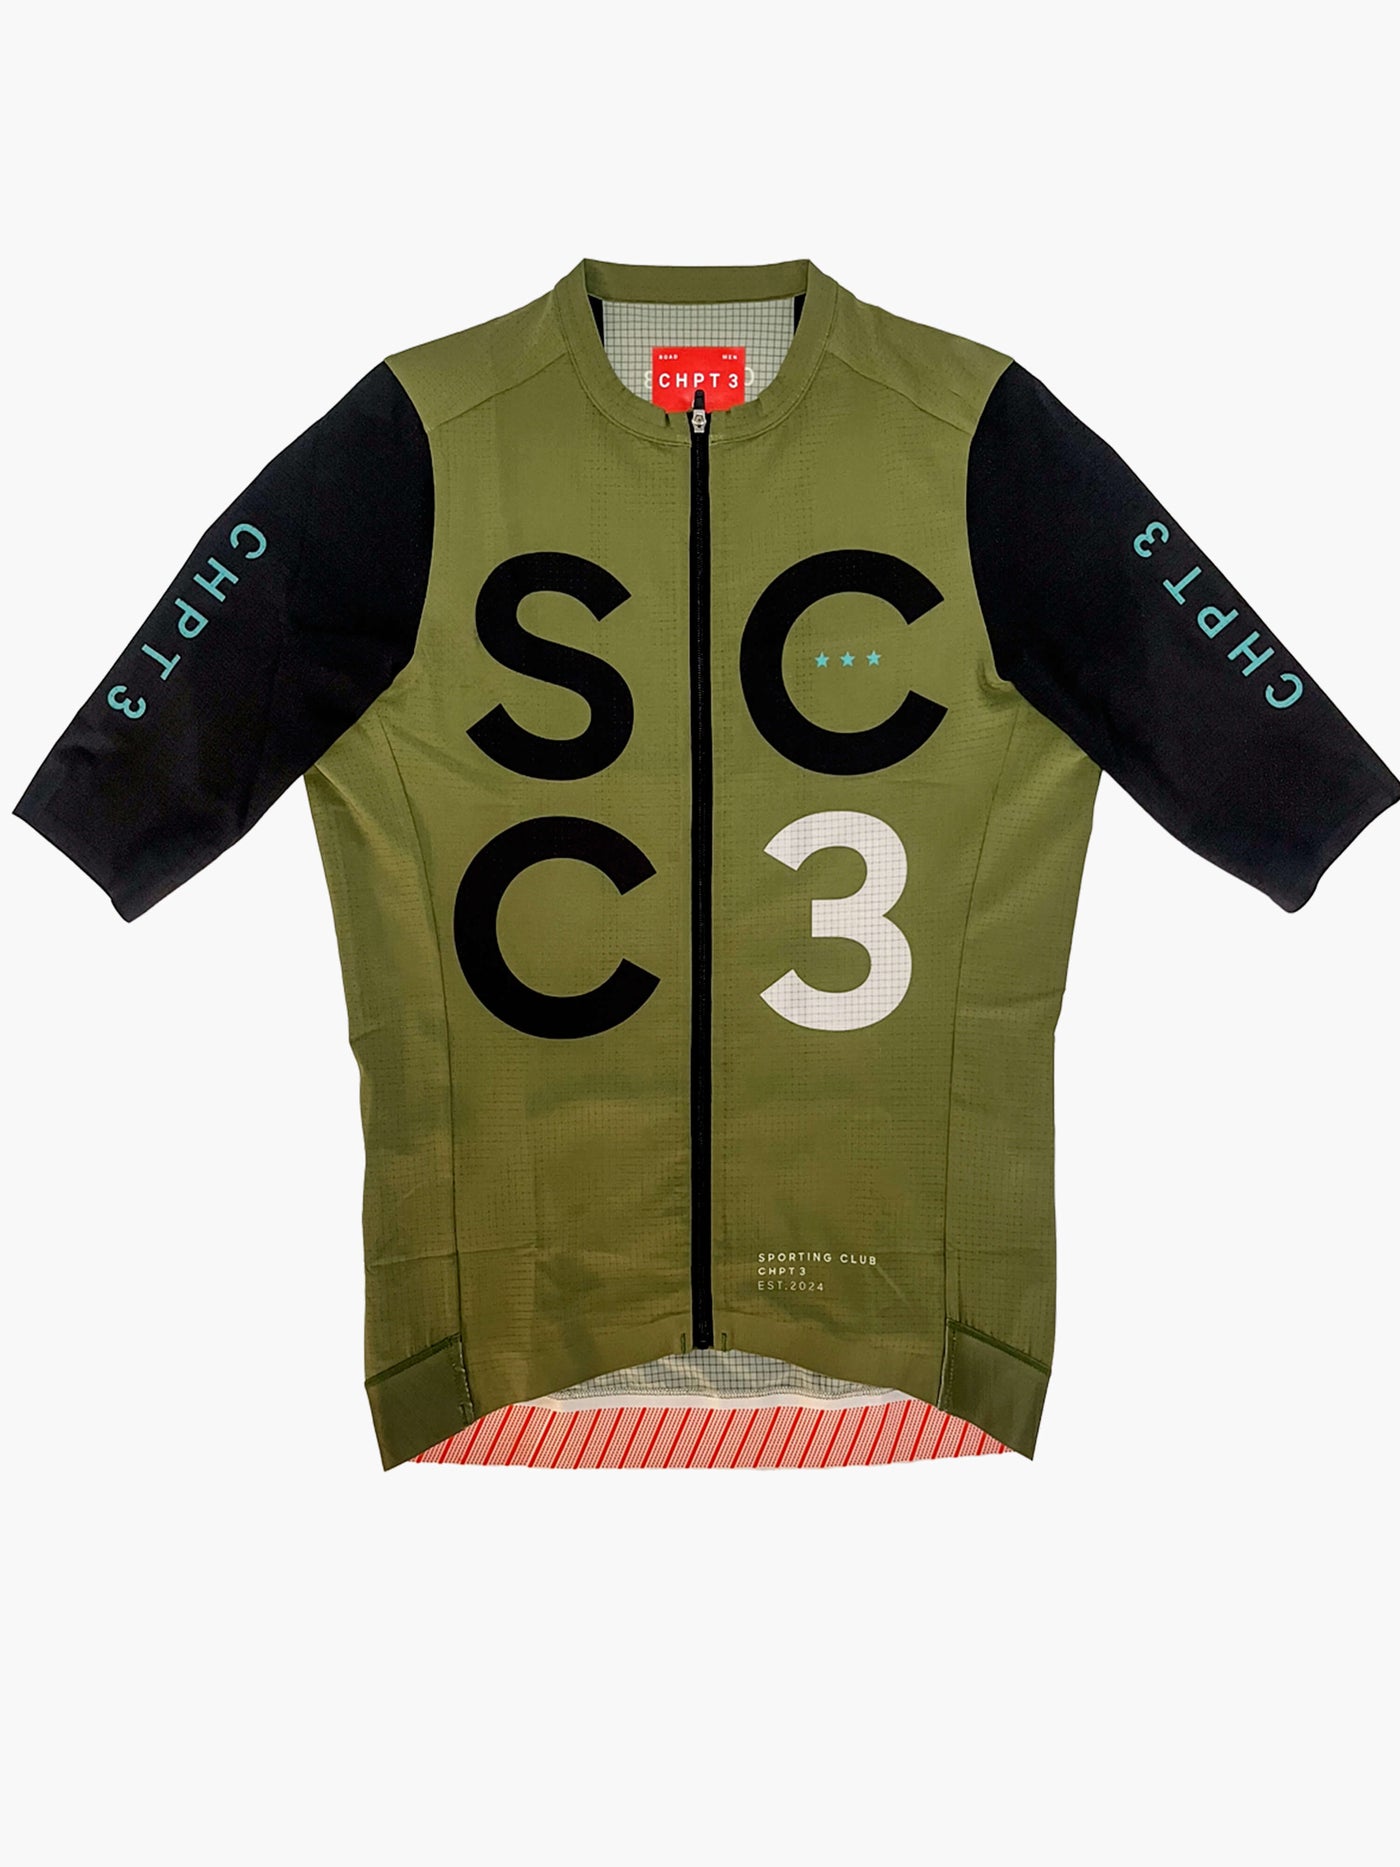 Sporting Club SCC3 First Edition Jersey